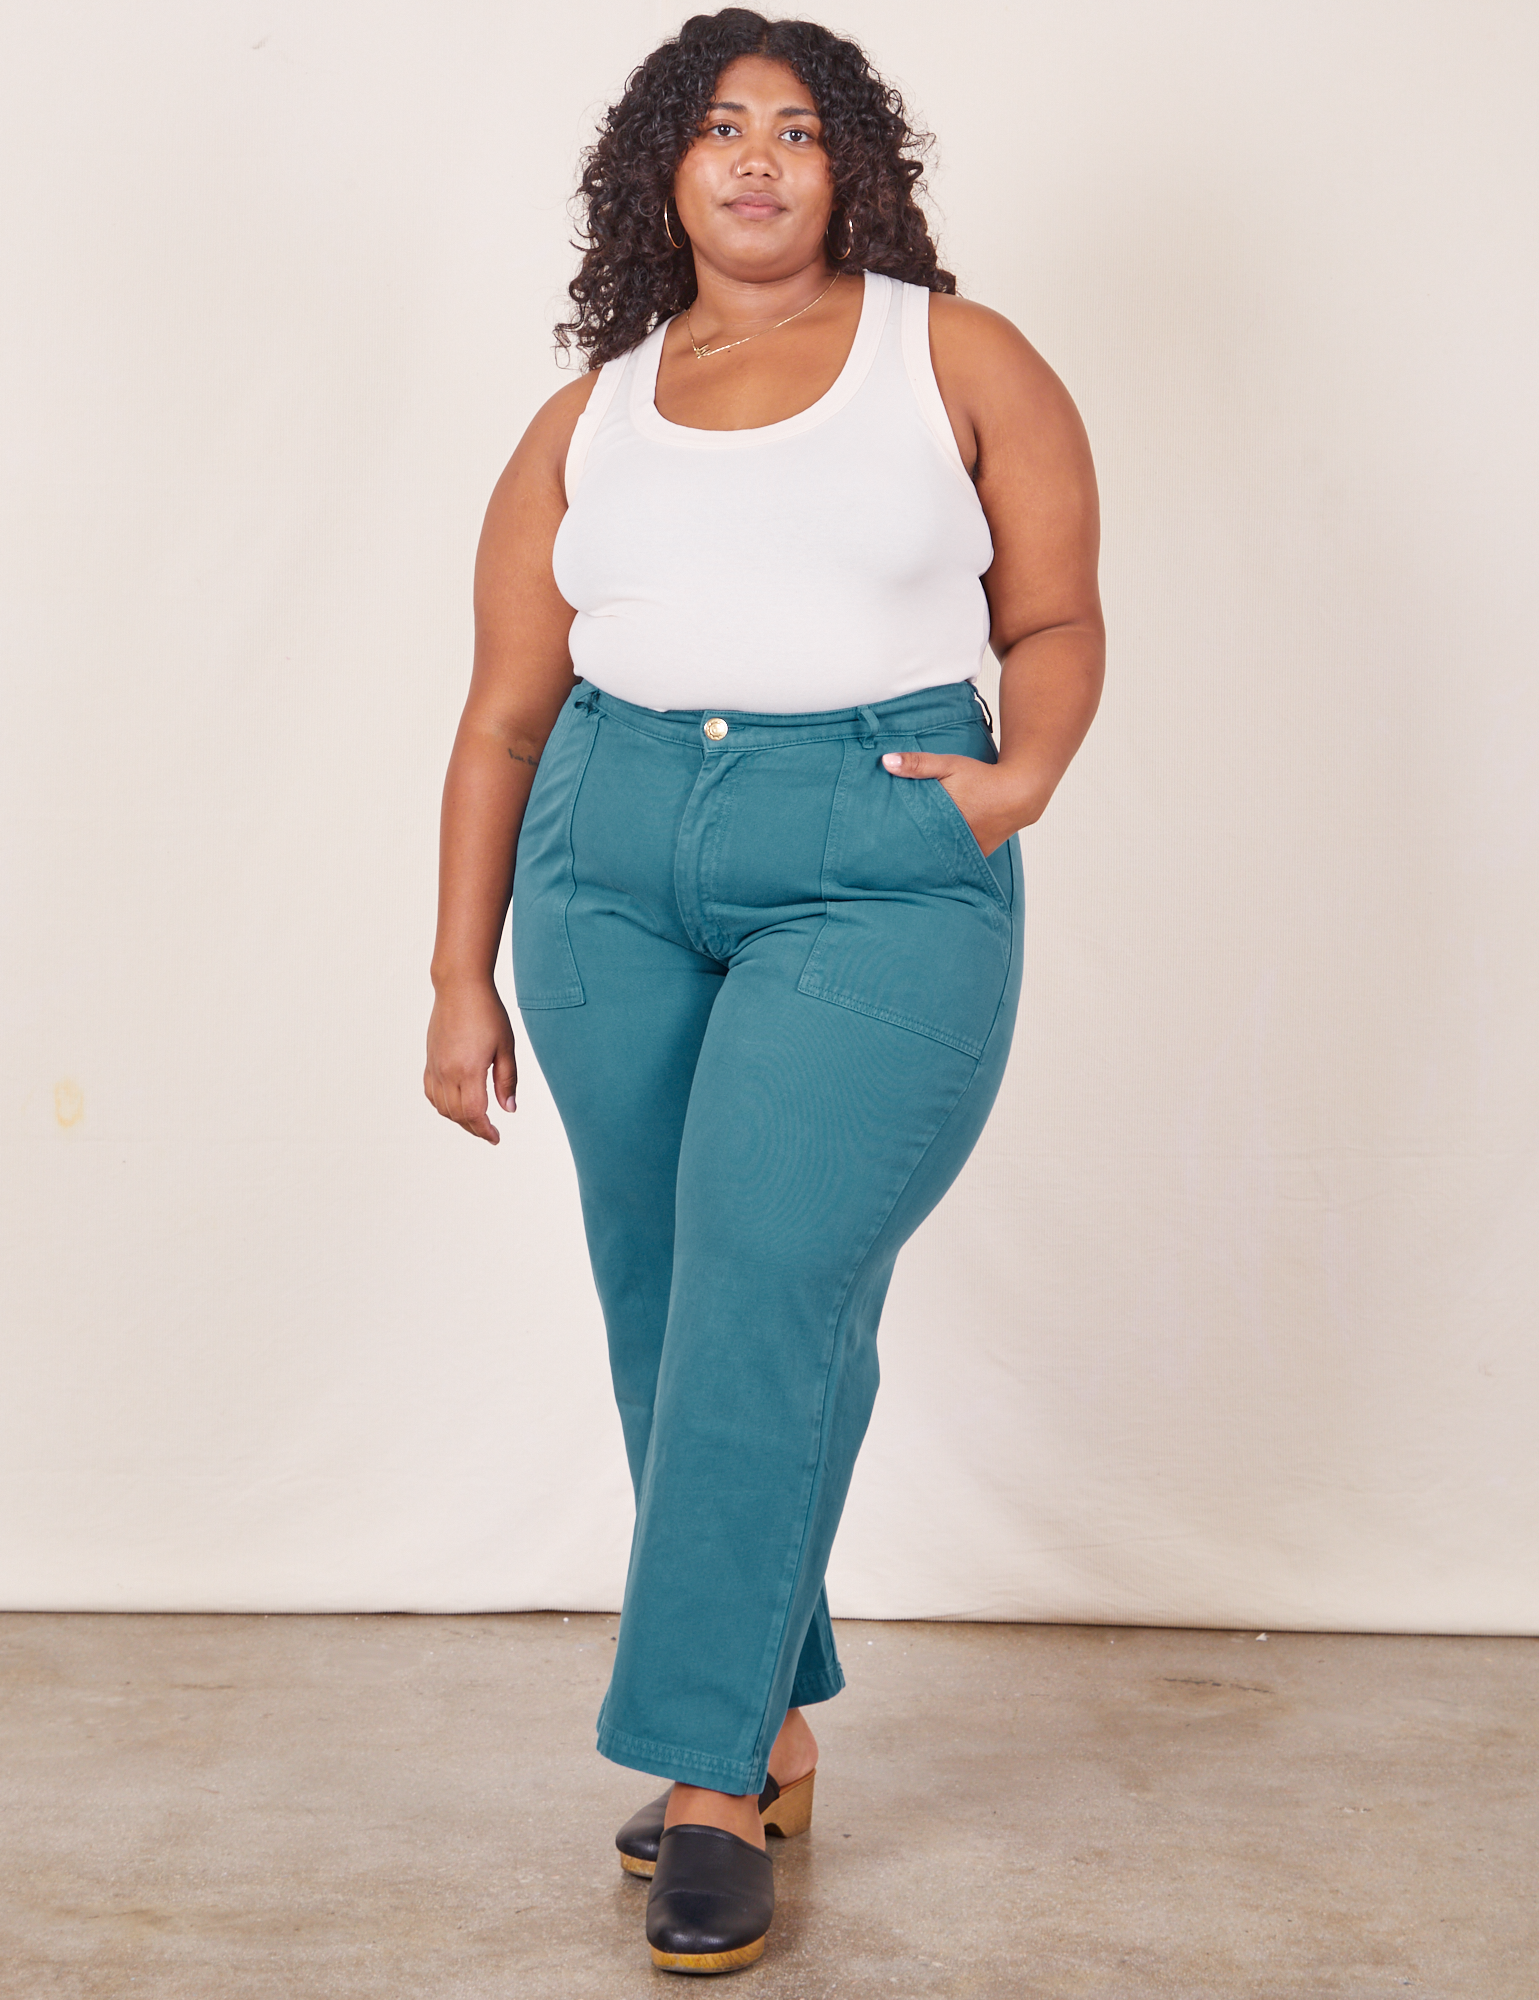 Morgan is 5&#39;5&quot; and wearing size 1XL Work Pants in Marine Blue paired with Tank Top in vintage tee off-white